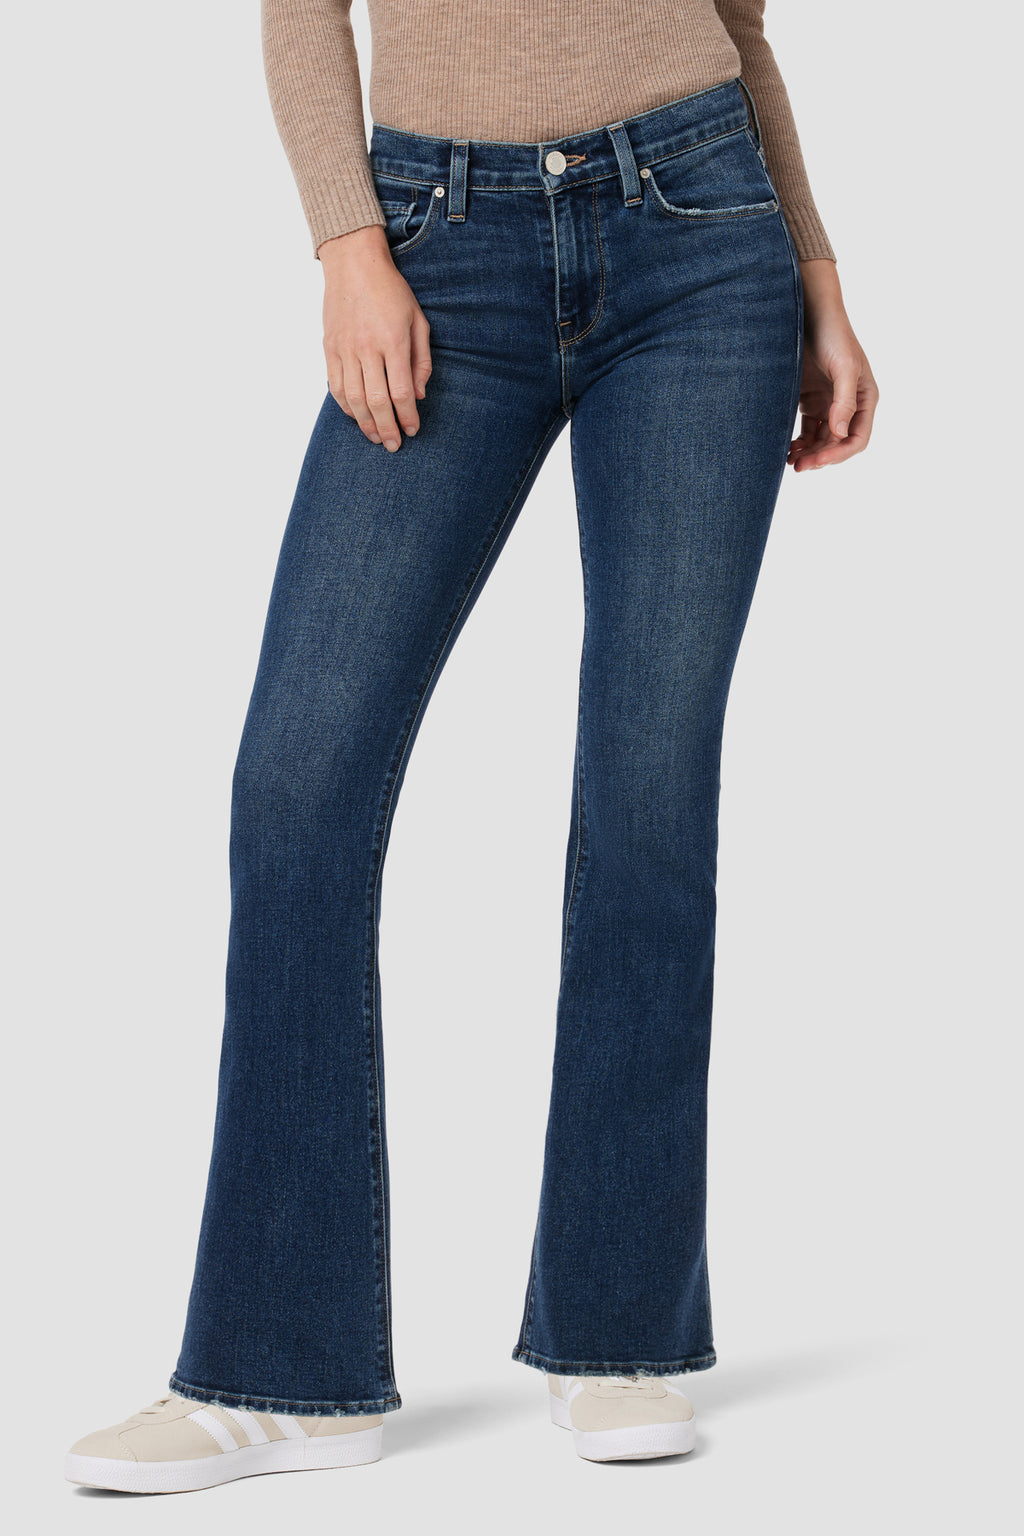 Nico Mid-Rise Bootcut Barefoot Jean